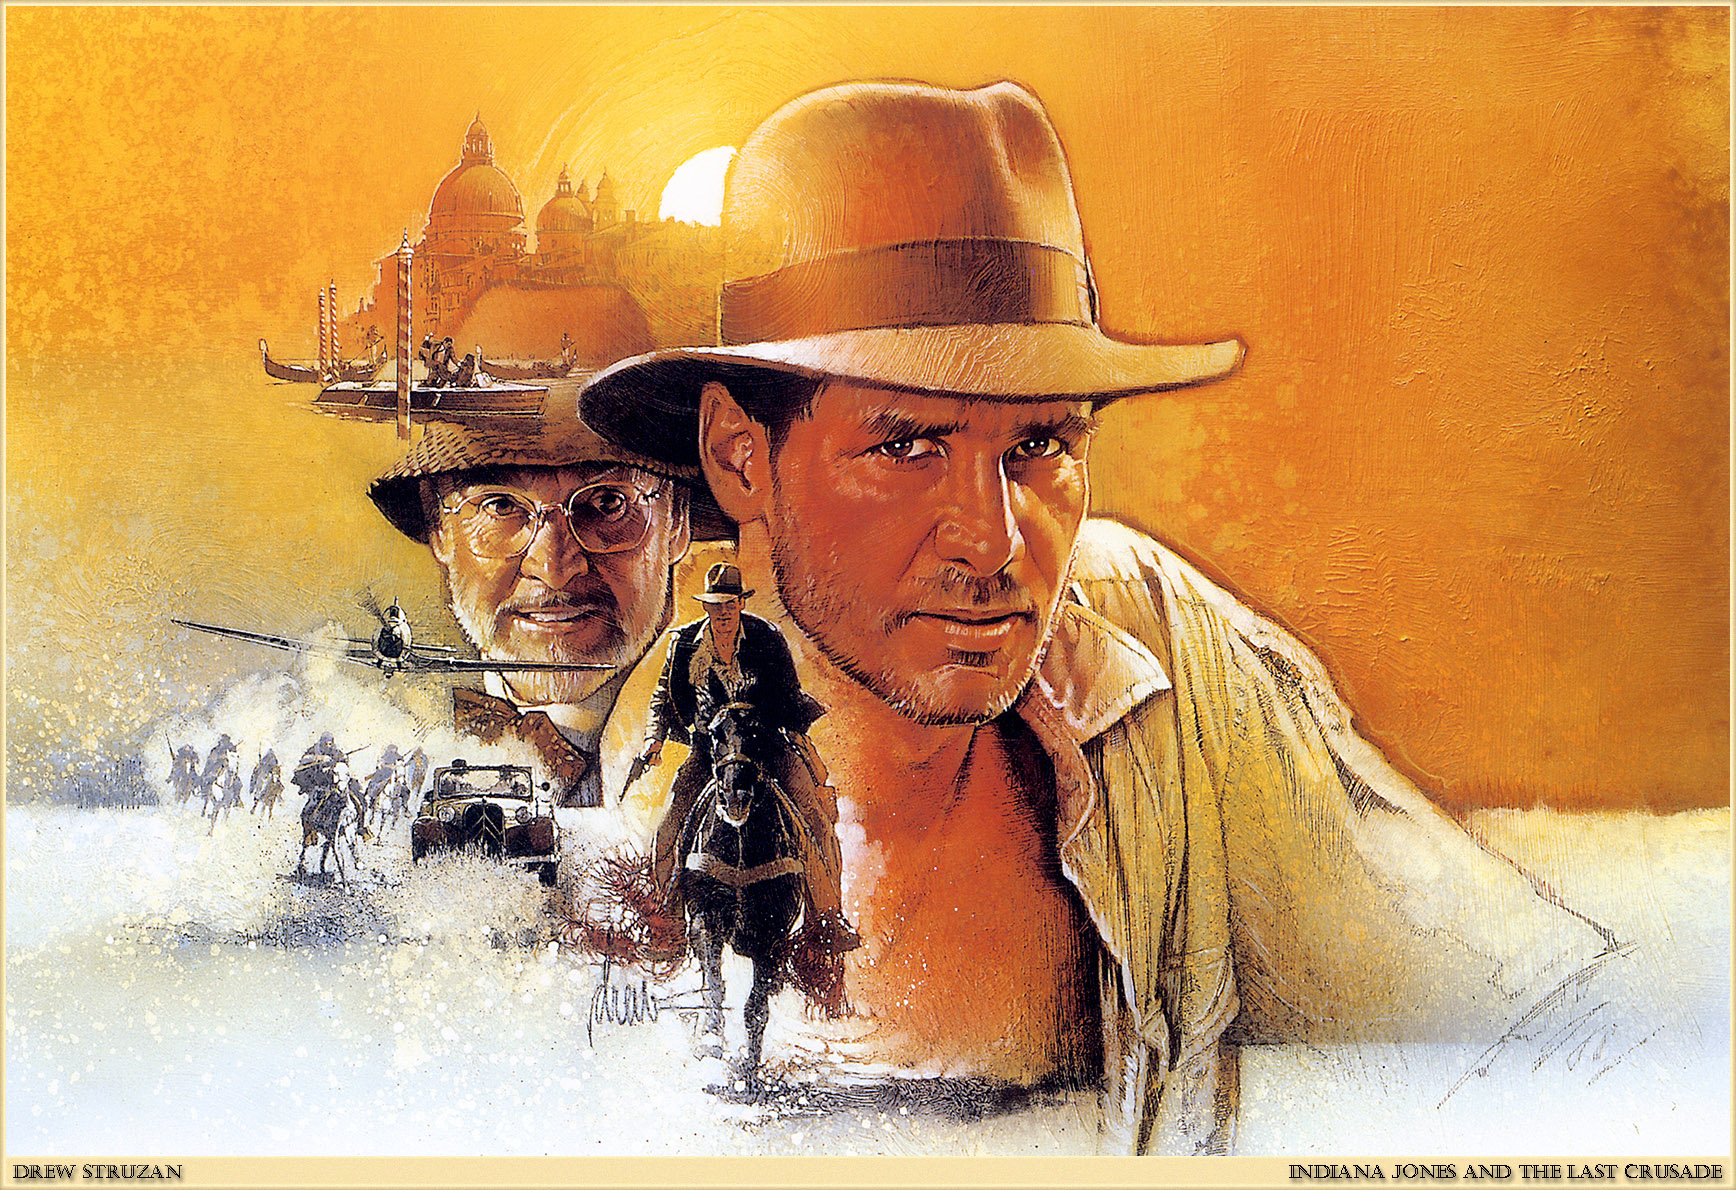 Indiana Jones and the Last Crusade Wallpaper and Background Image